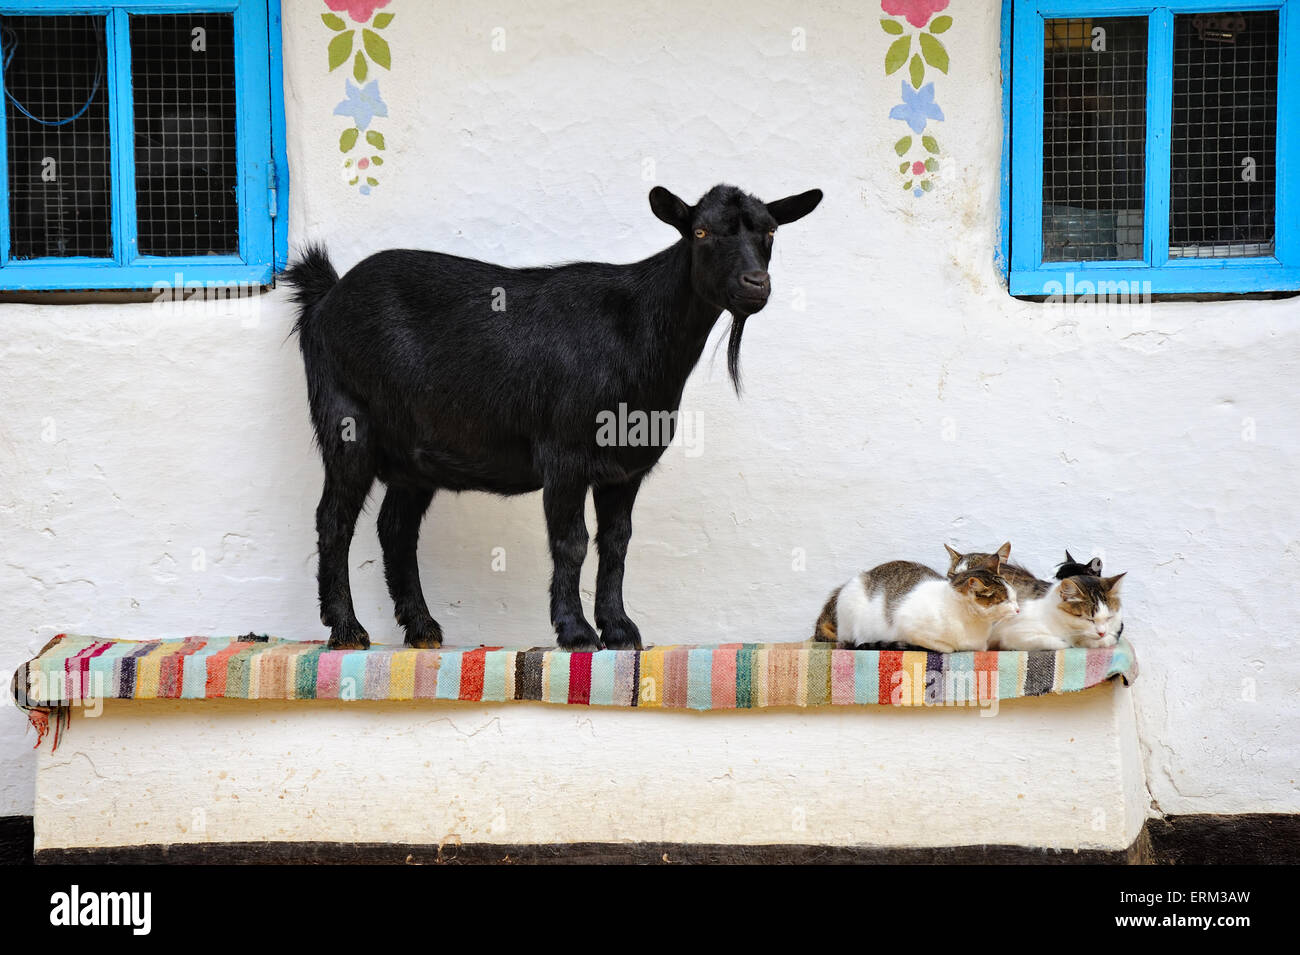 Rural scene. Goat and a cat on the bench. Farmhouse. Stock Photo